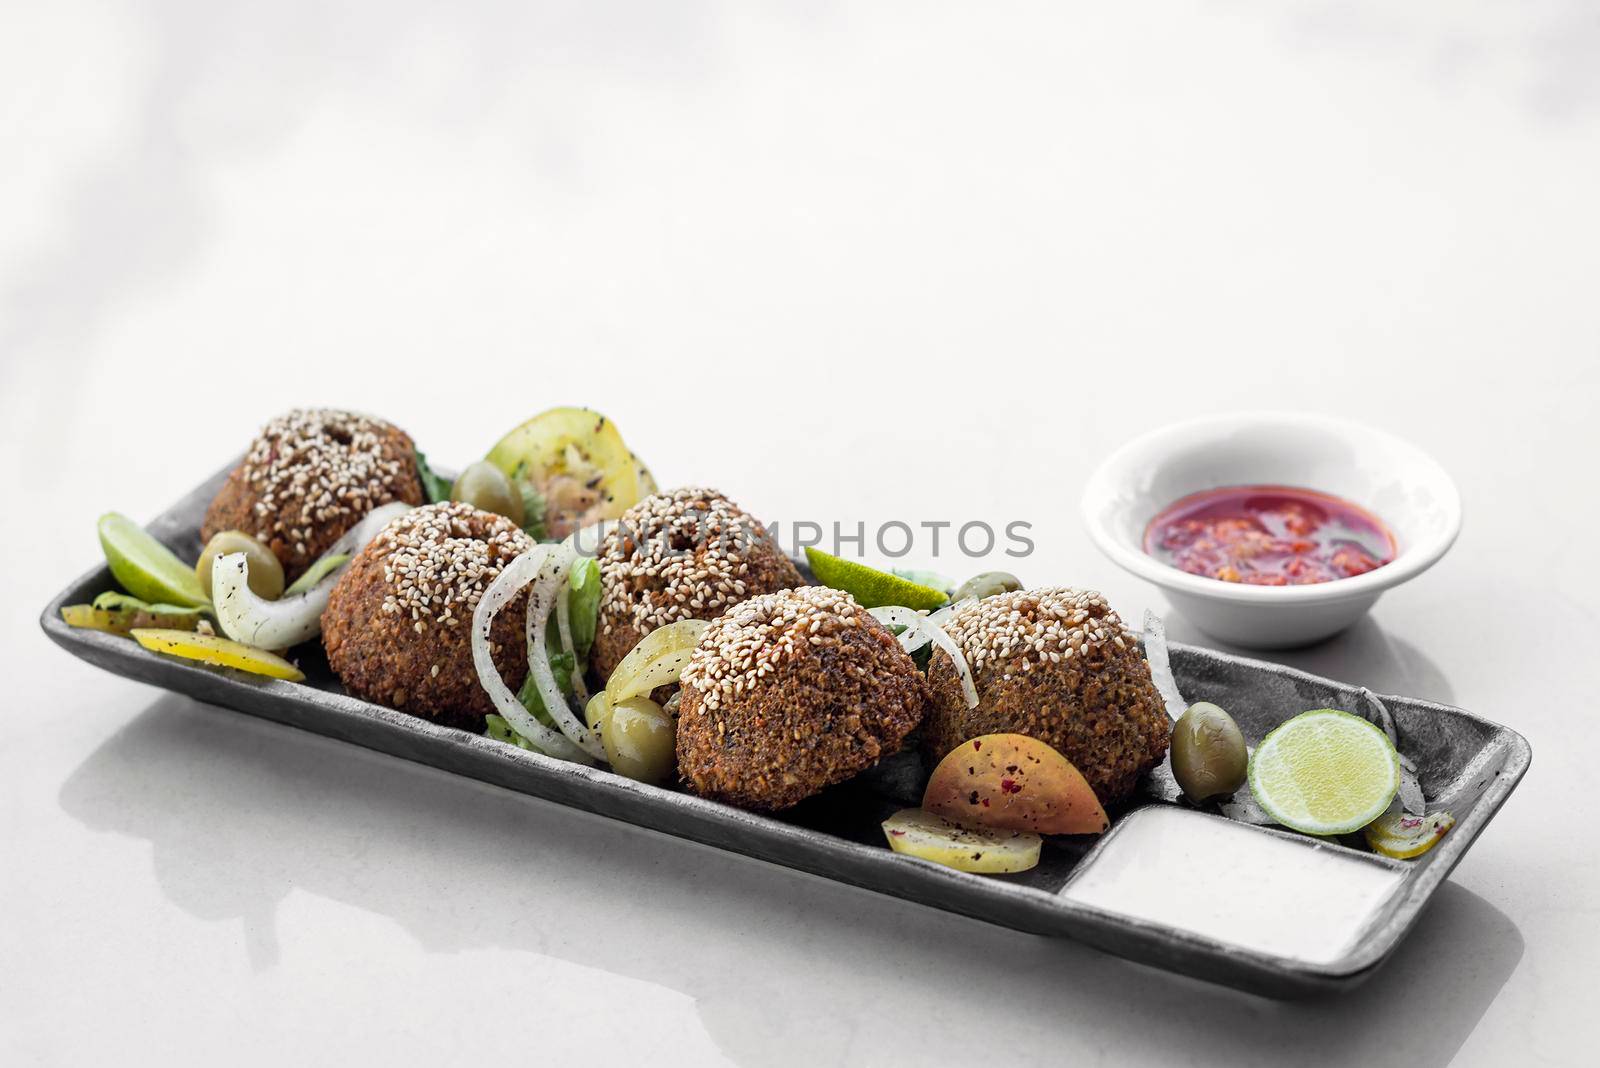 lebanese organic falafel plate with pickles salad and sauces